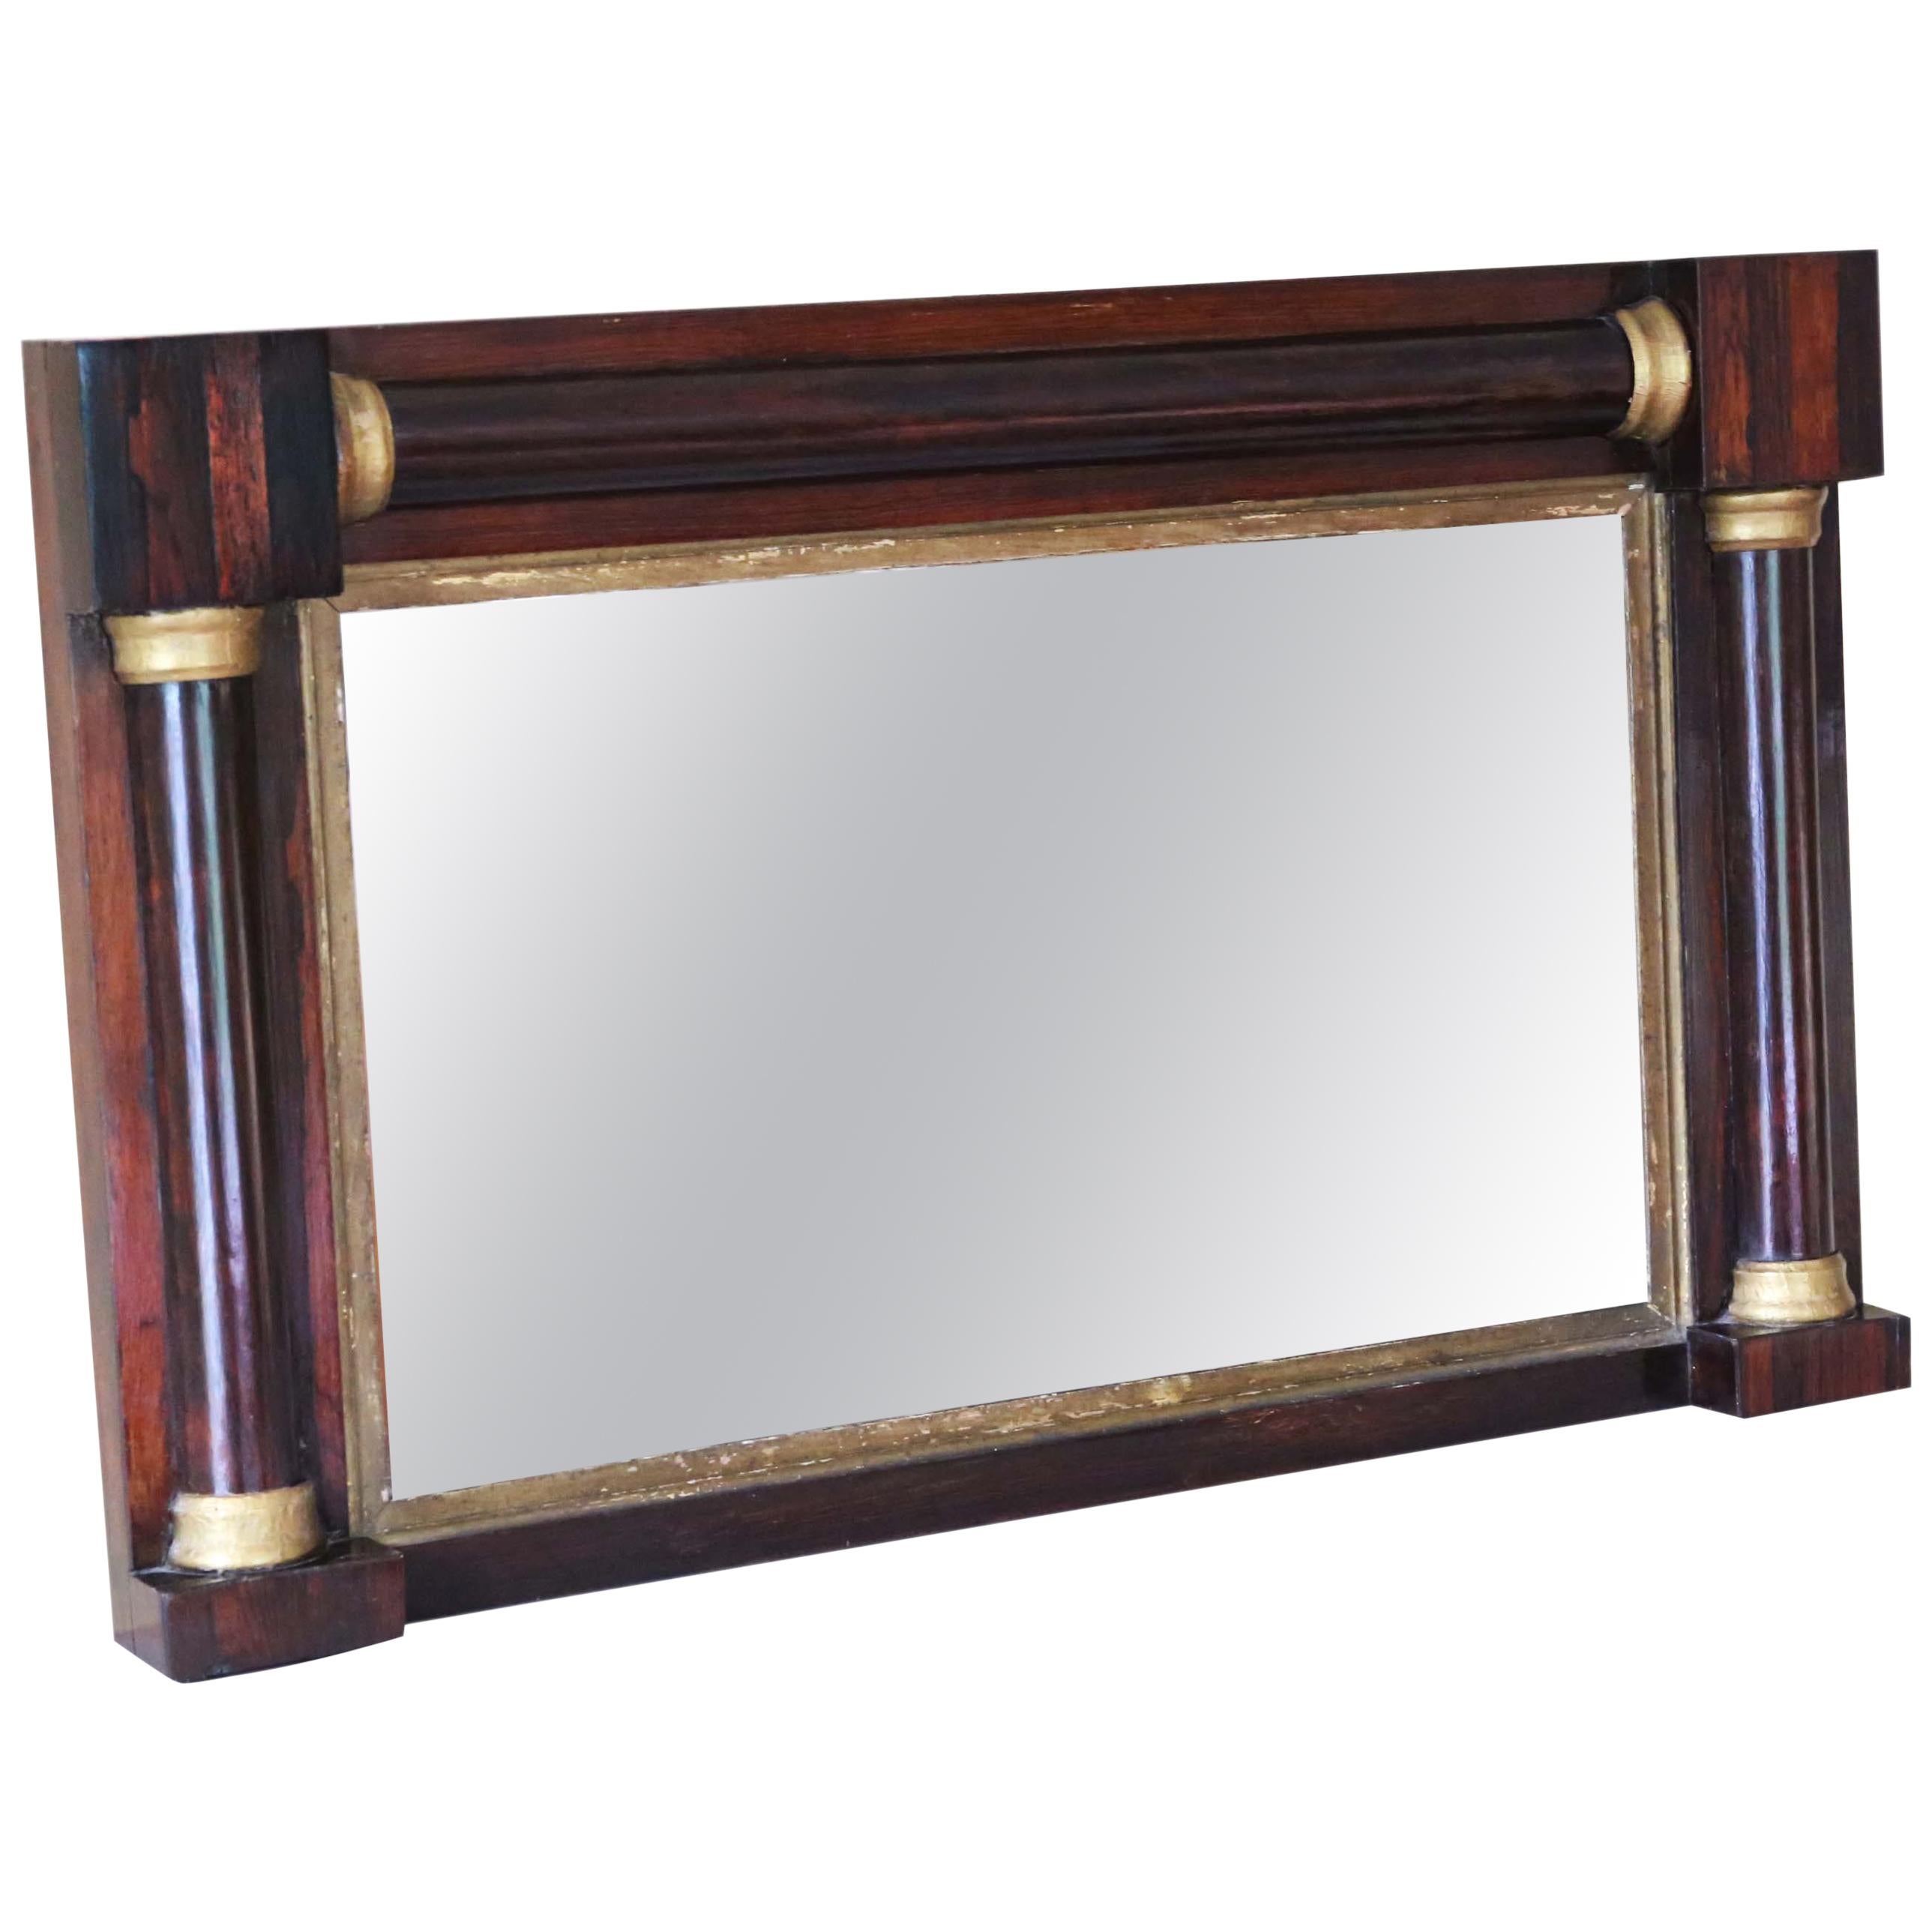 Antique Quality Regency Mahogany and Gilt Overmantle or Wall Mirror, circa 1825 For Sale